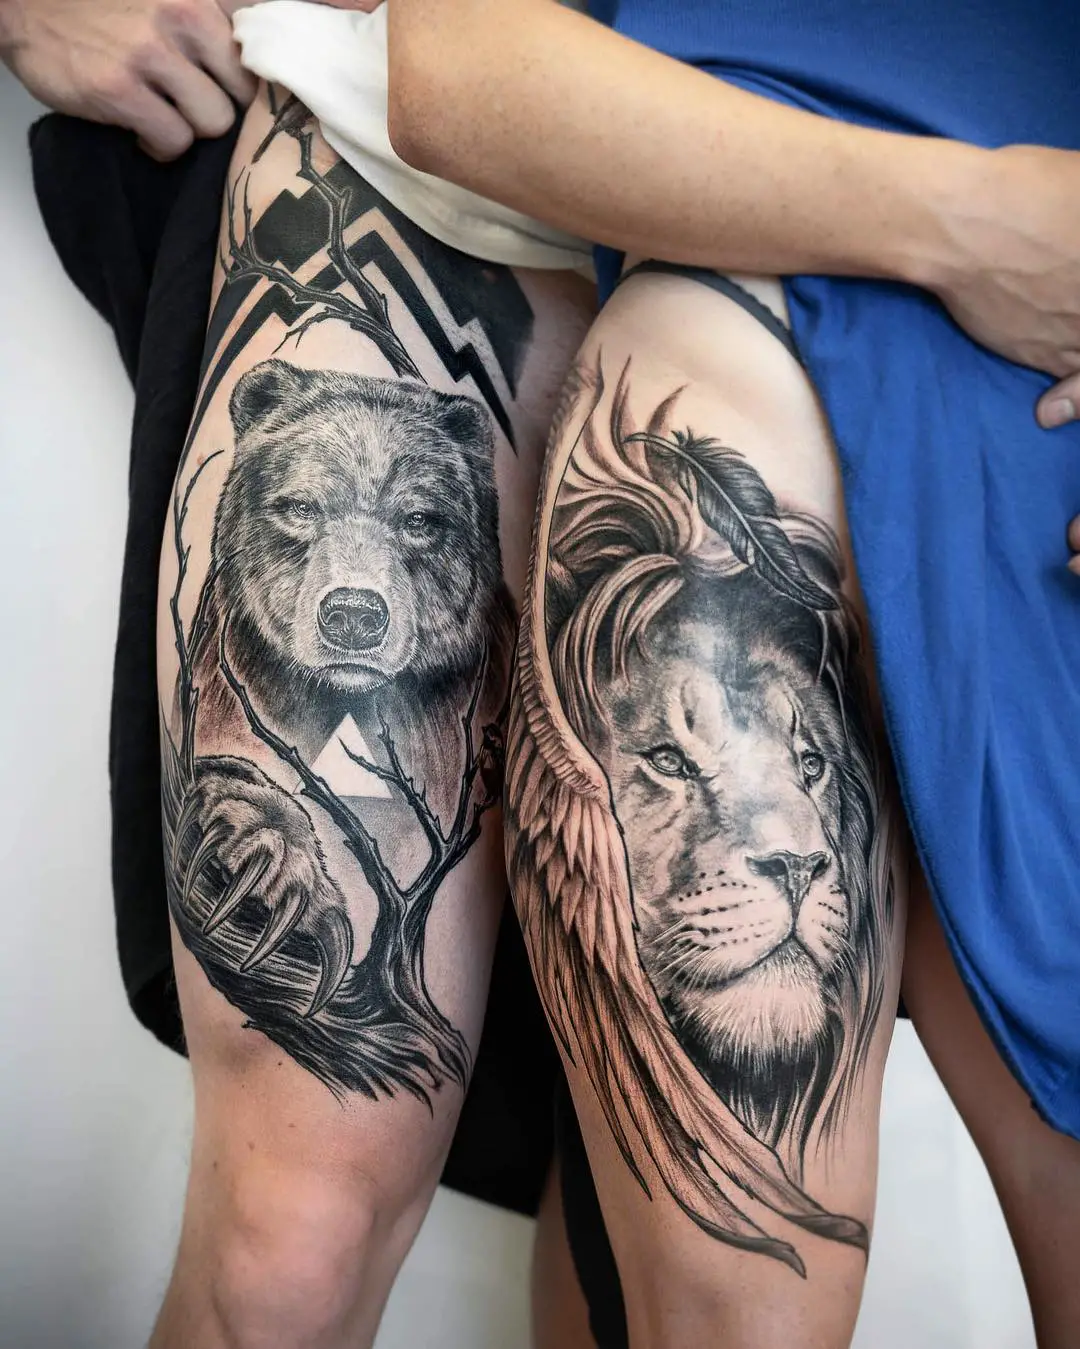 25 Finest Tattoo Shops in Montana for Unique Tattoo Art